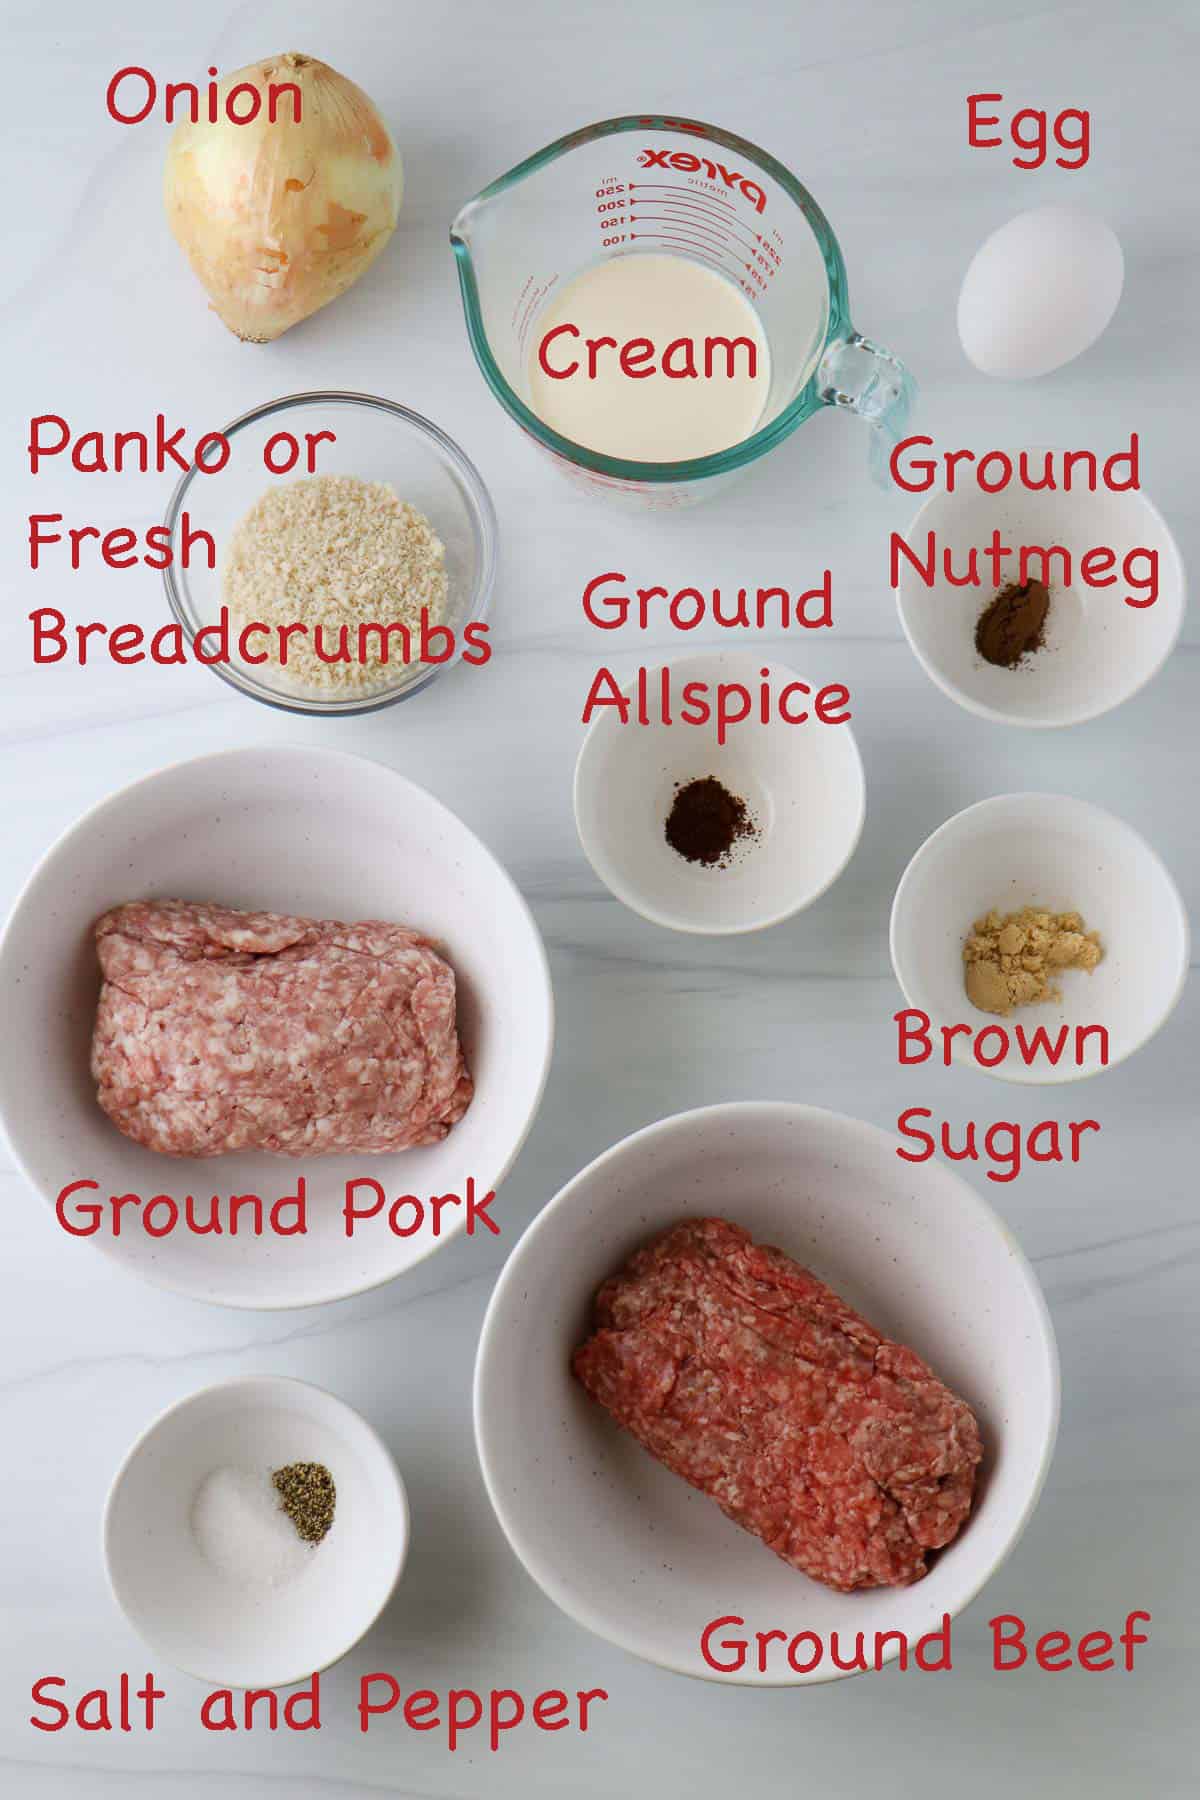 Labeled ingredients for Easy Swedish Meatballs with Gravy.